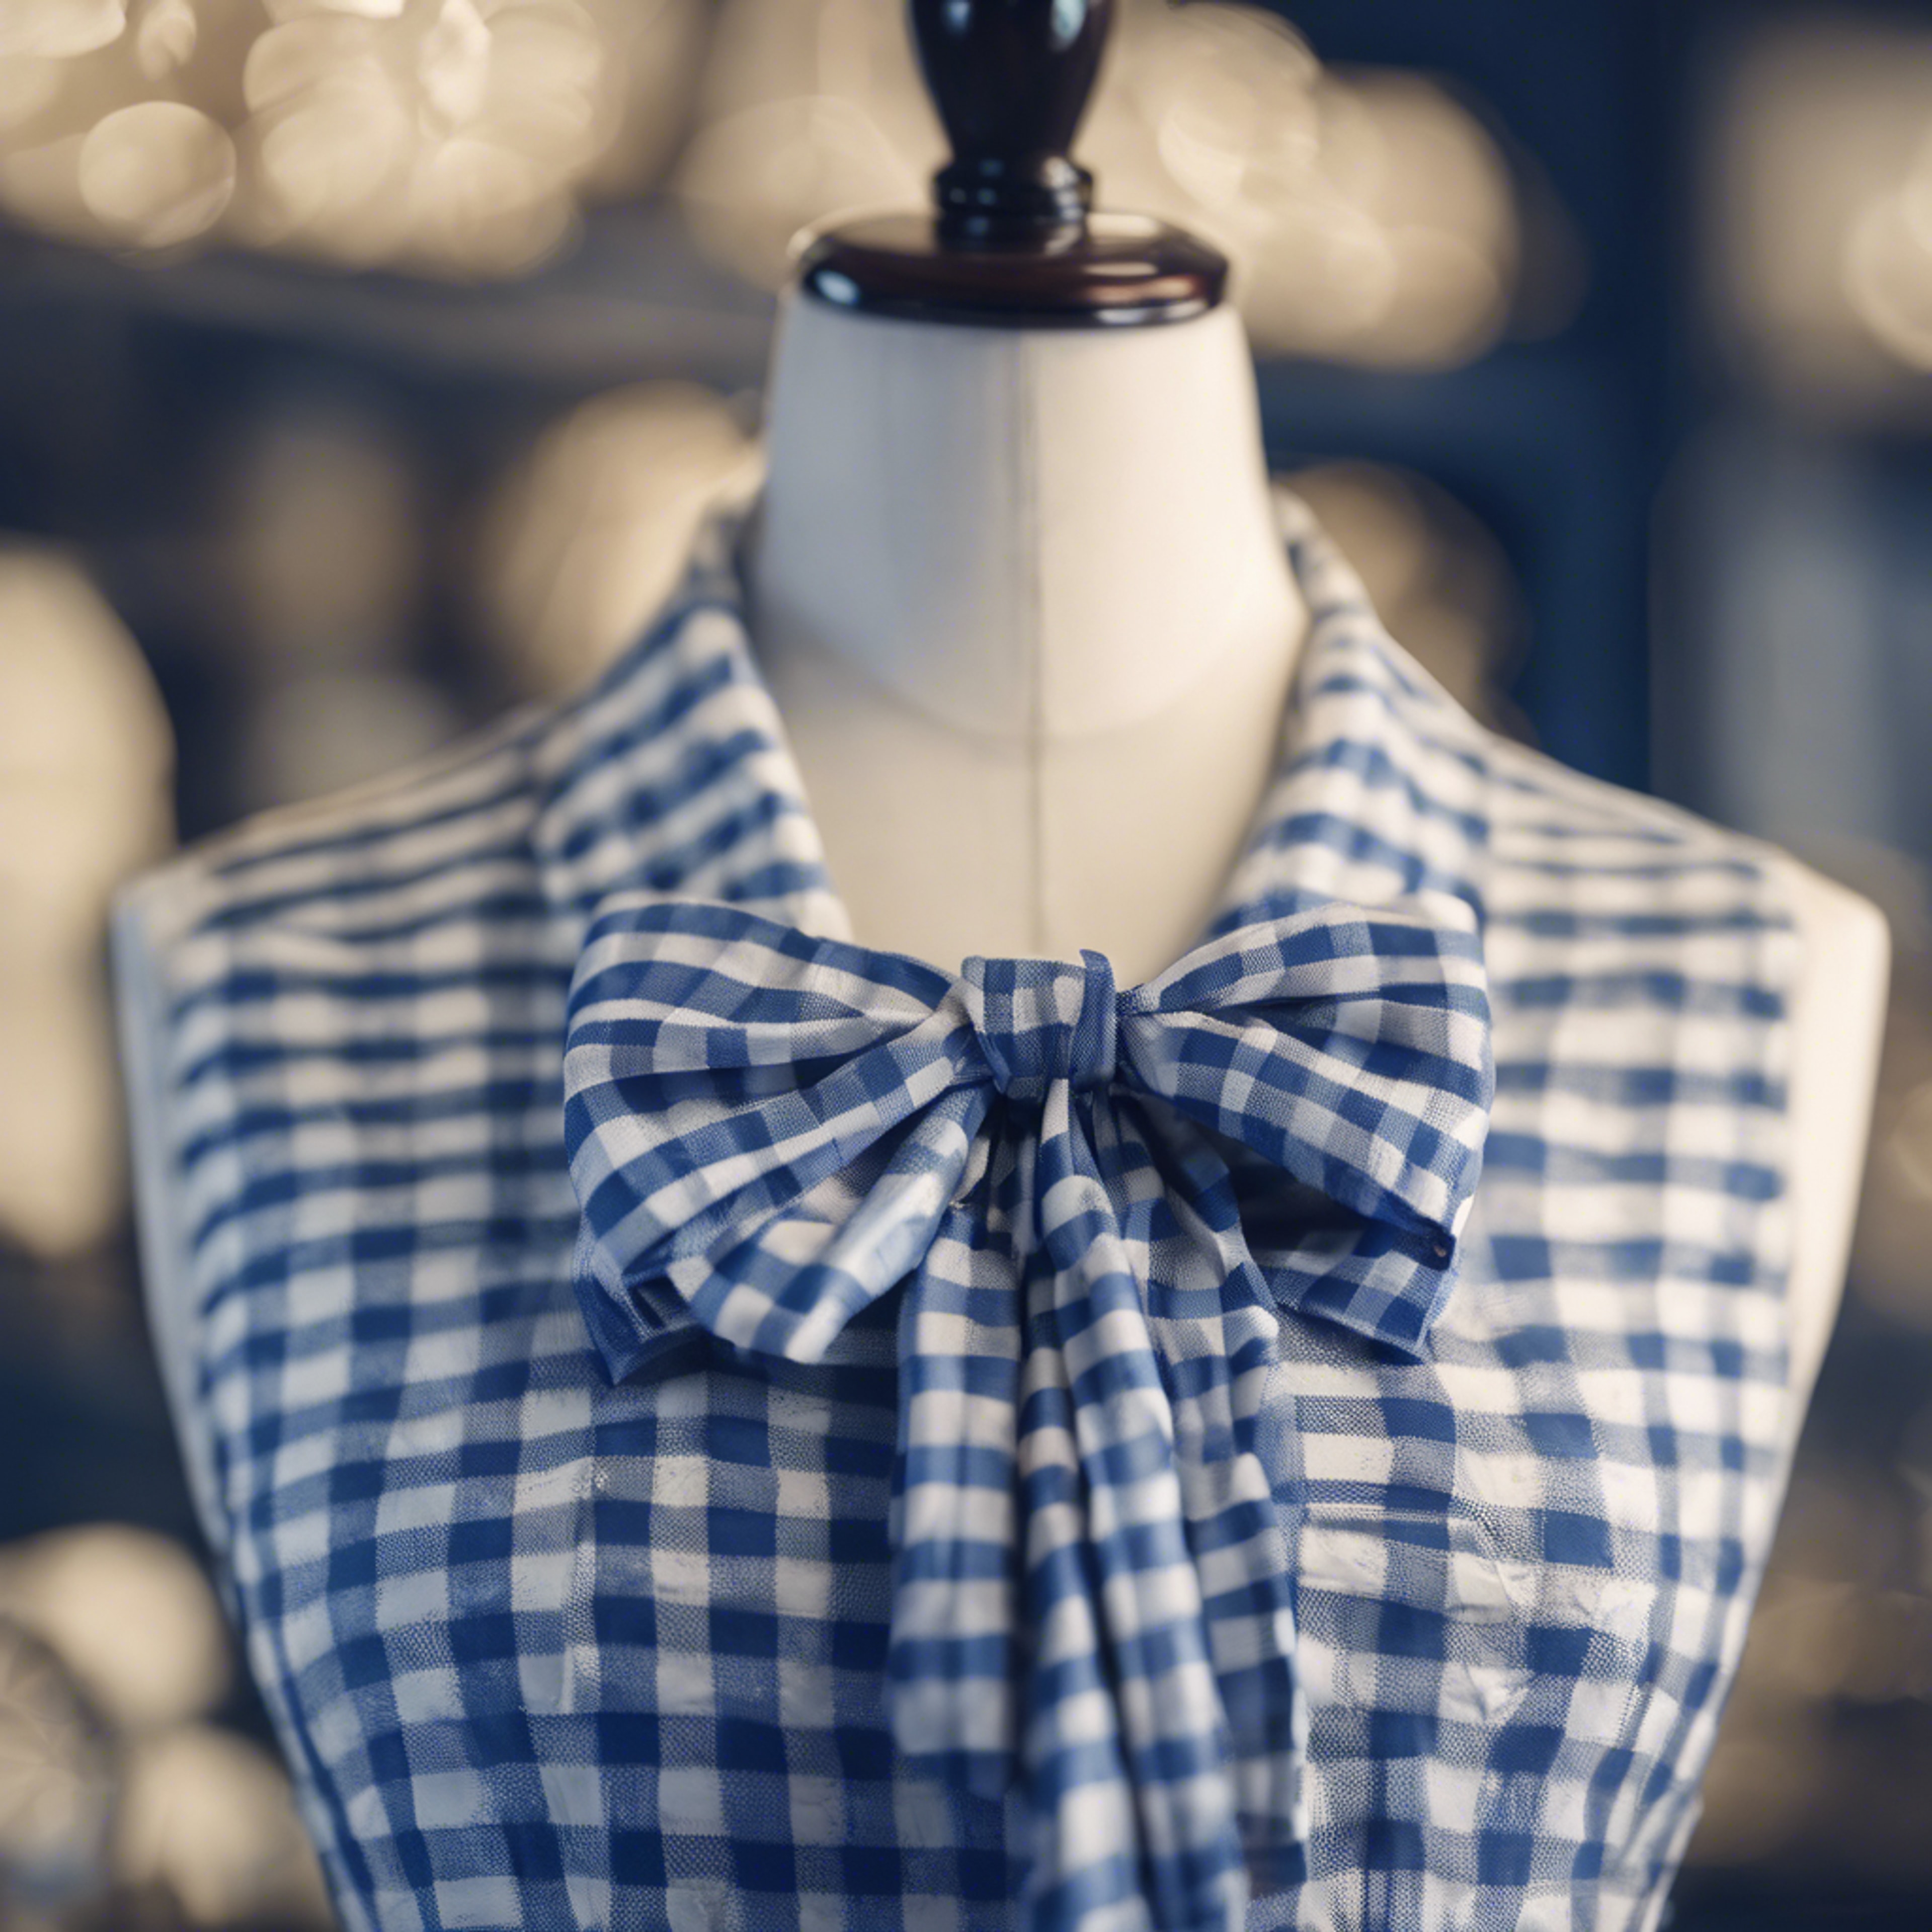 A preppy style blue and white chequered dress with a neatly tied bow on a mannequin.” Wallpaper[2cff79e4d79d40c780d3]